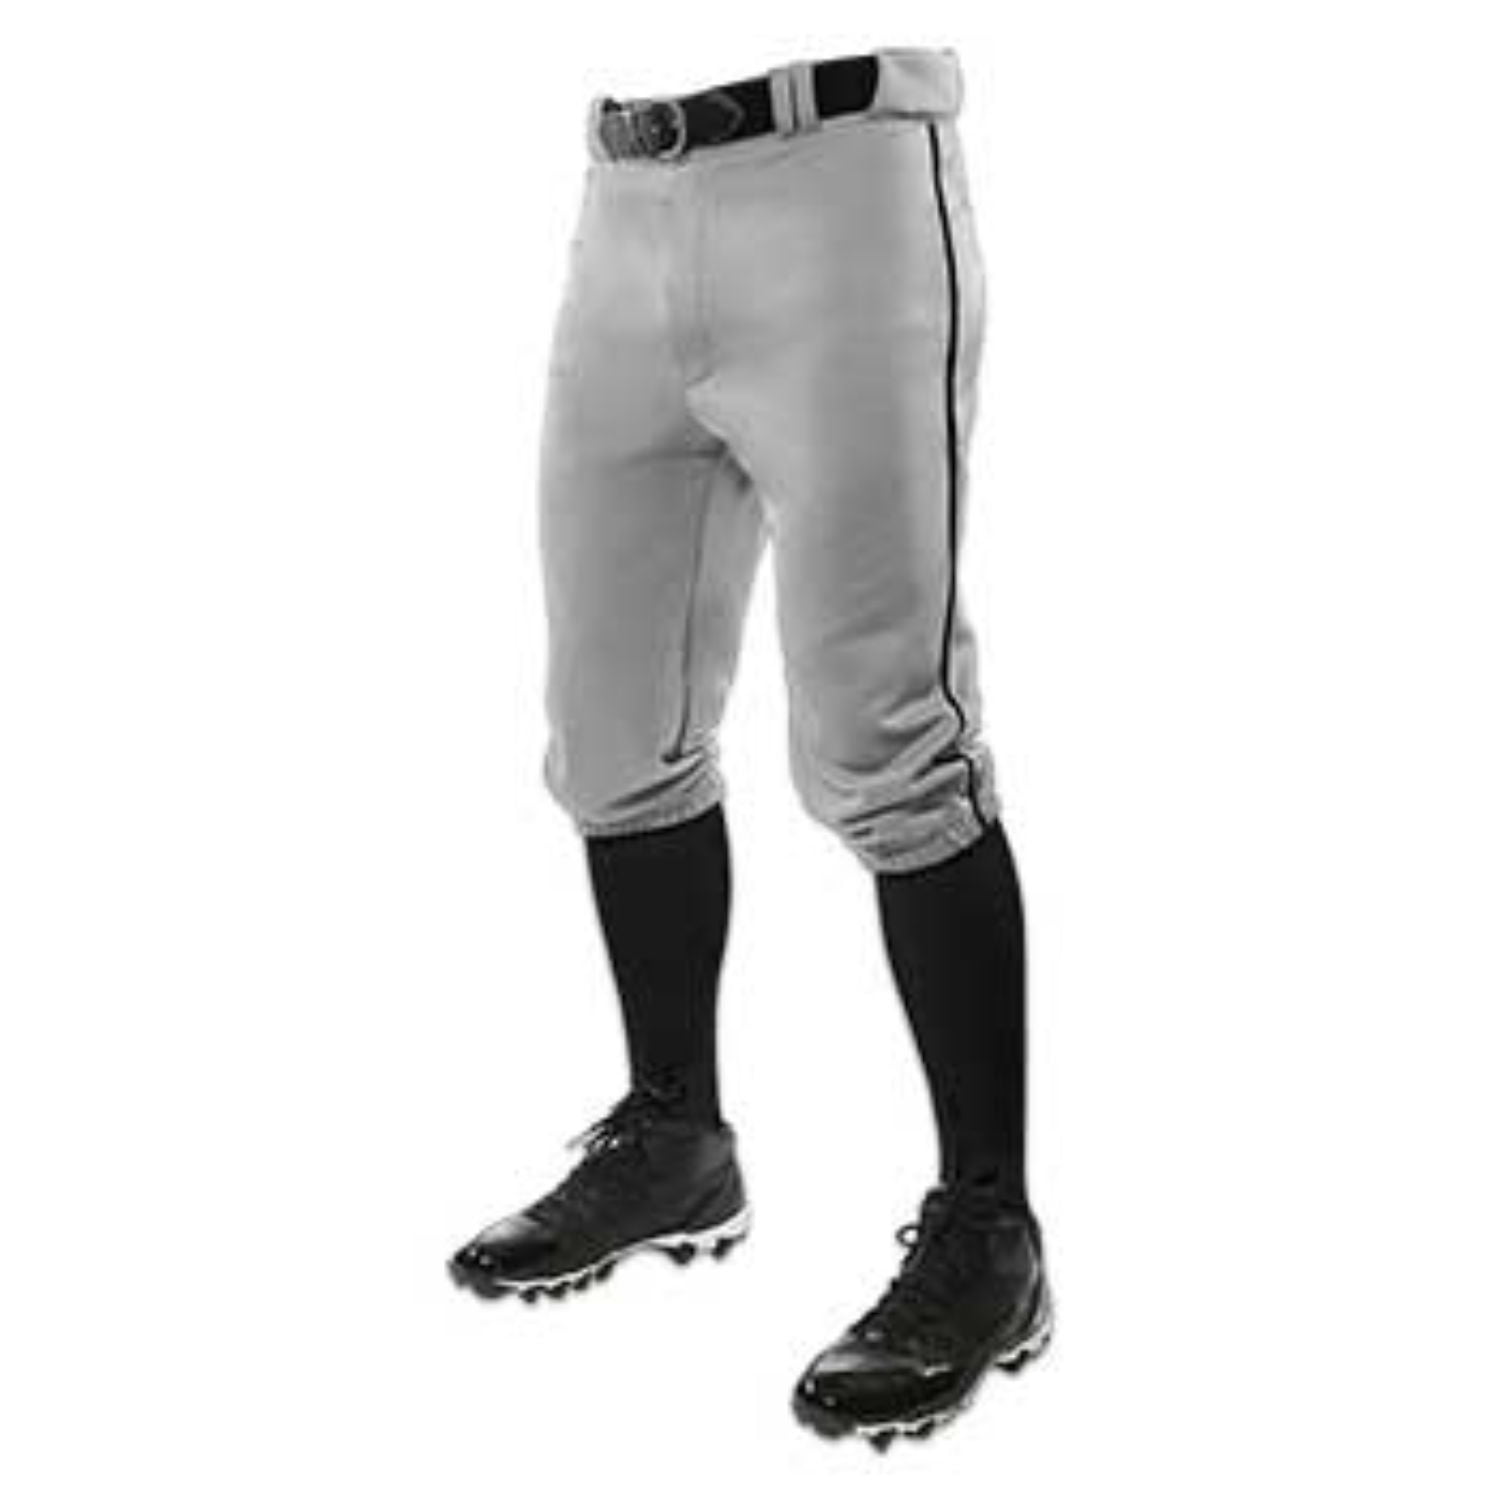 Easton Youth Boys Pro Knicker Baseball Pants w Piped Piping Braid A167106 white 